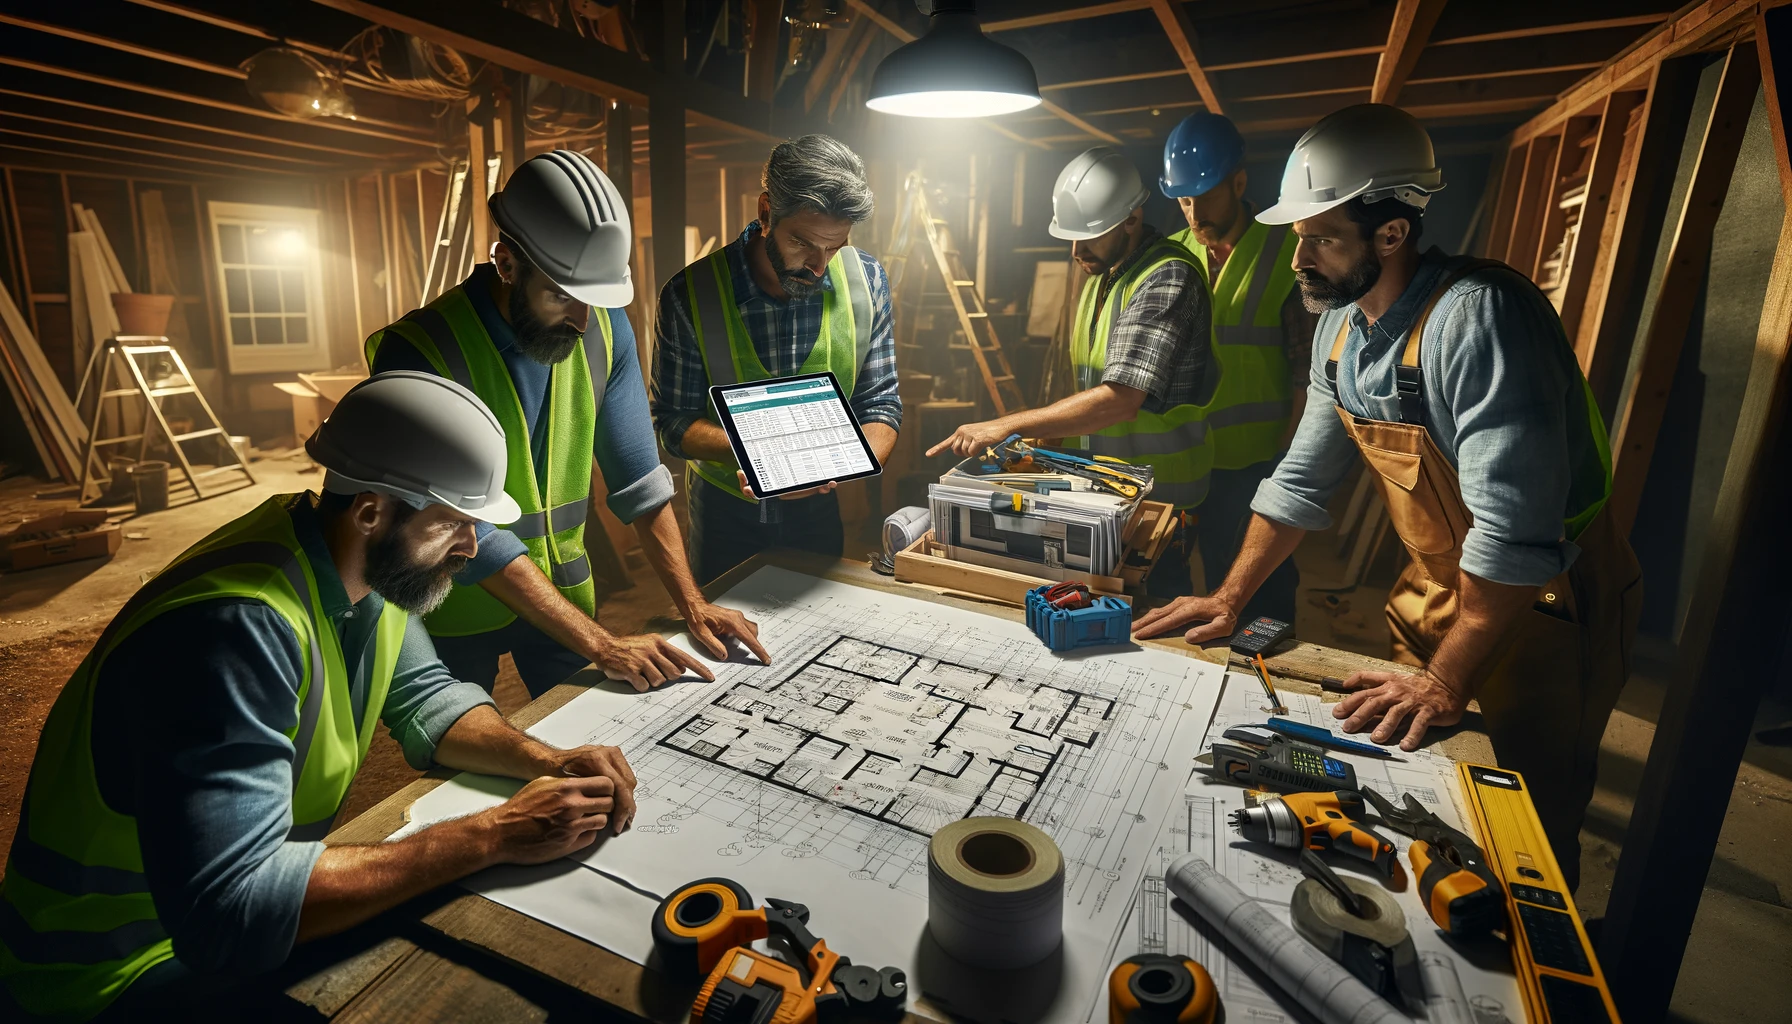 photorealistic photograph depicting a remodeling contractor team efficiently working on a project site.